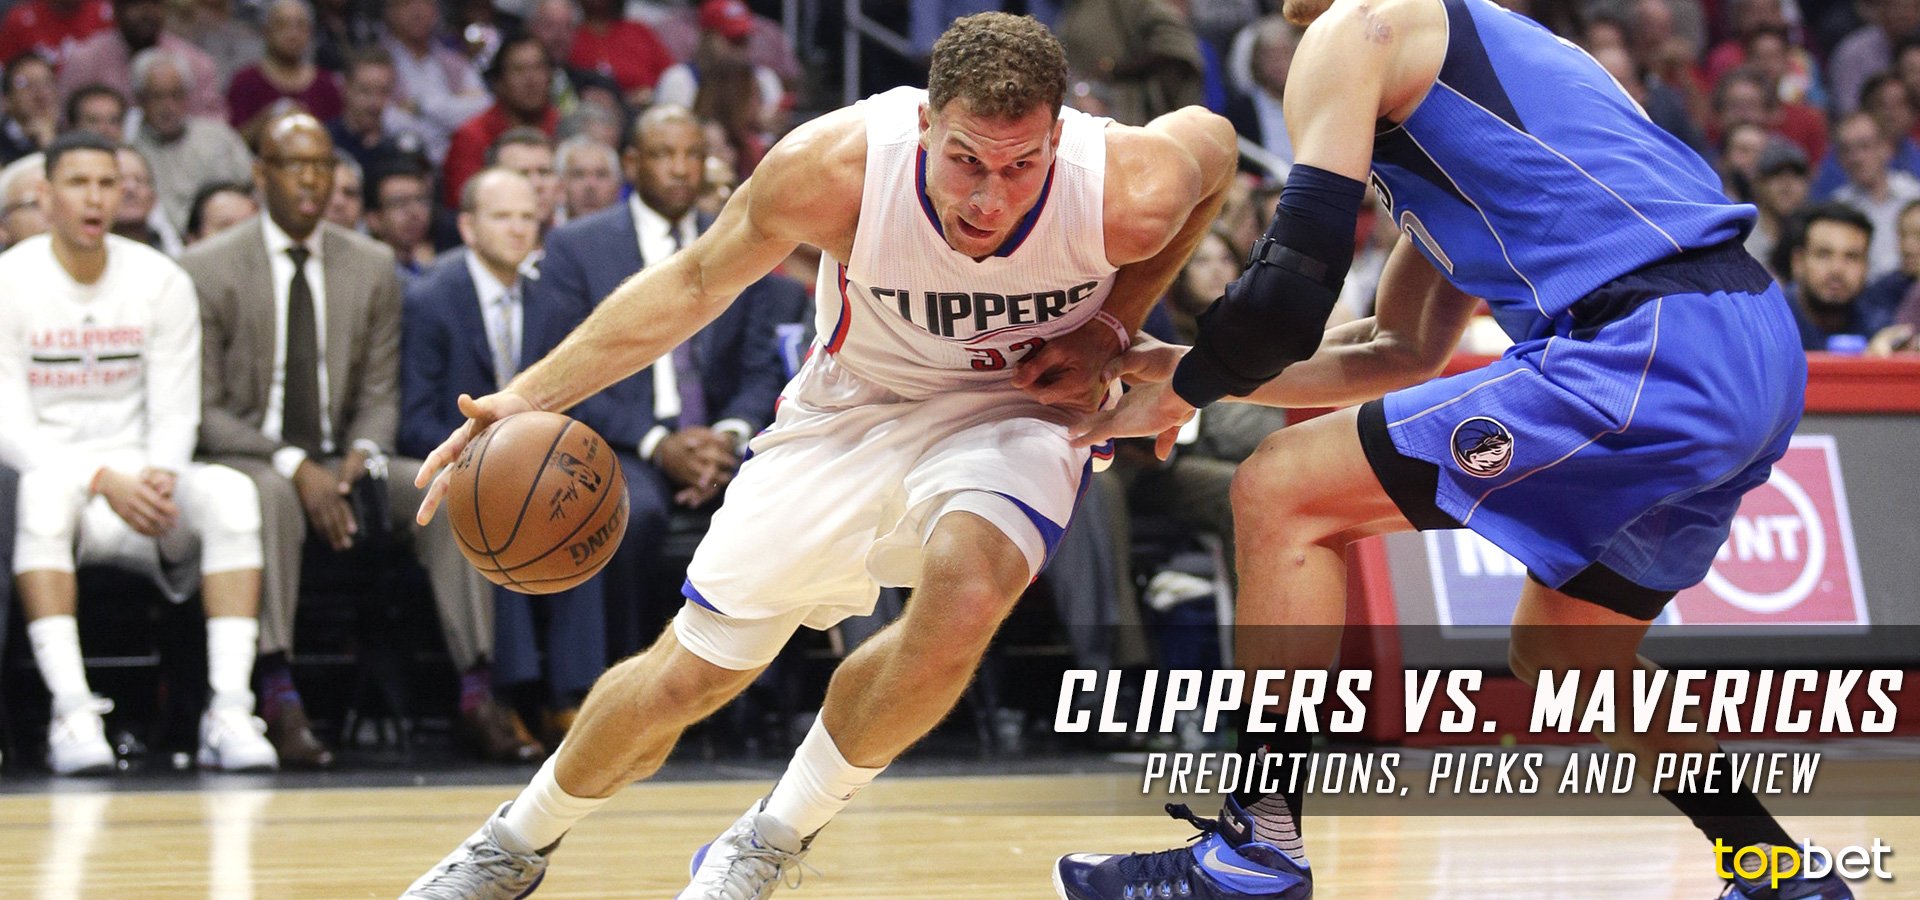 Clippers vs Mavs Predictions, Picks and Preview – March 2017